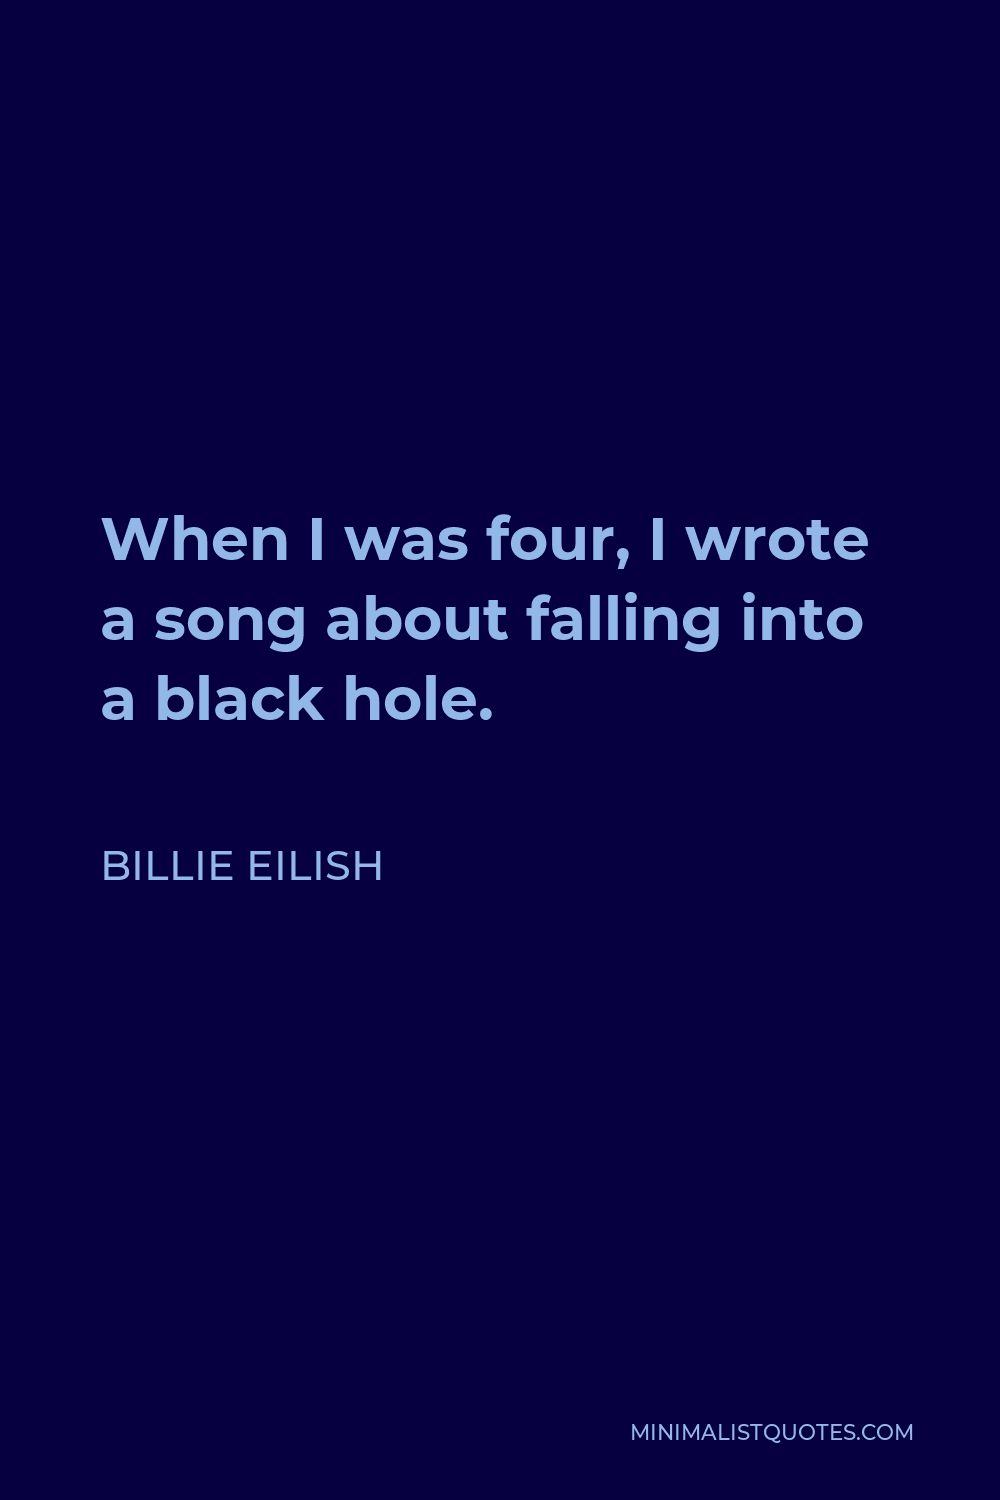 Billie Eilish Quote - When I was four, I wrote a song about falling into a black hole.